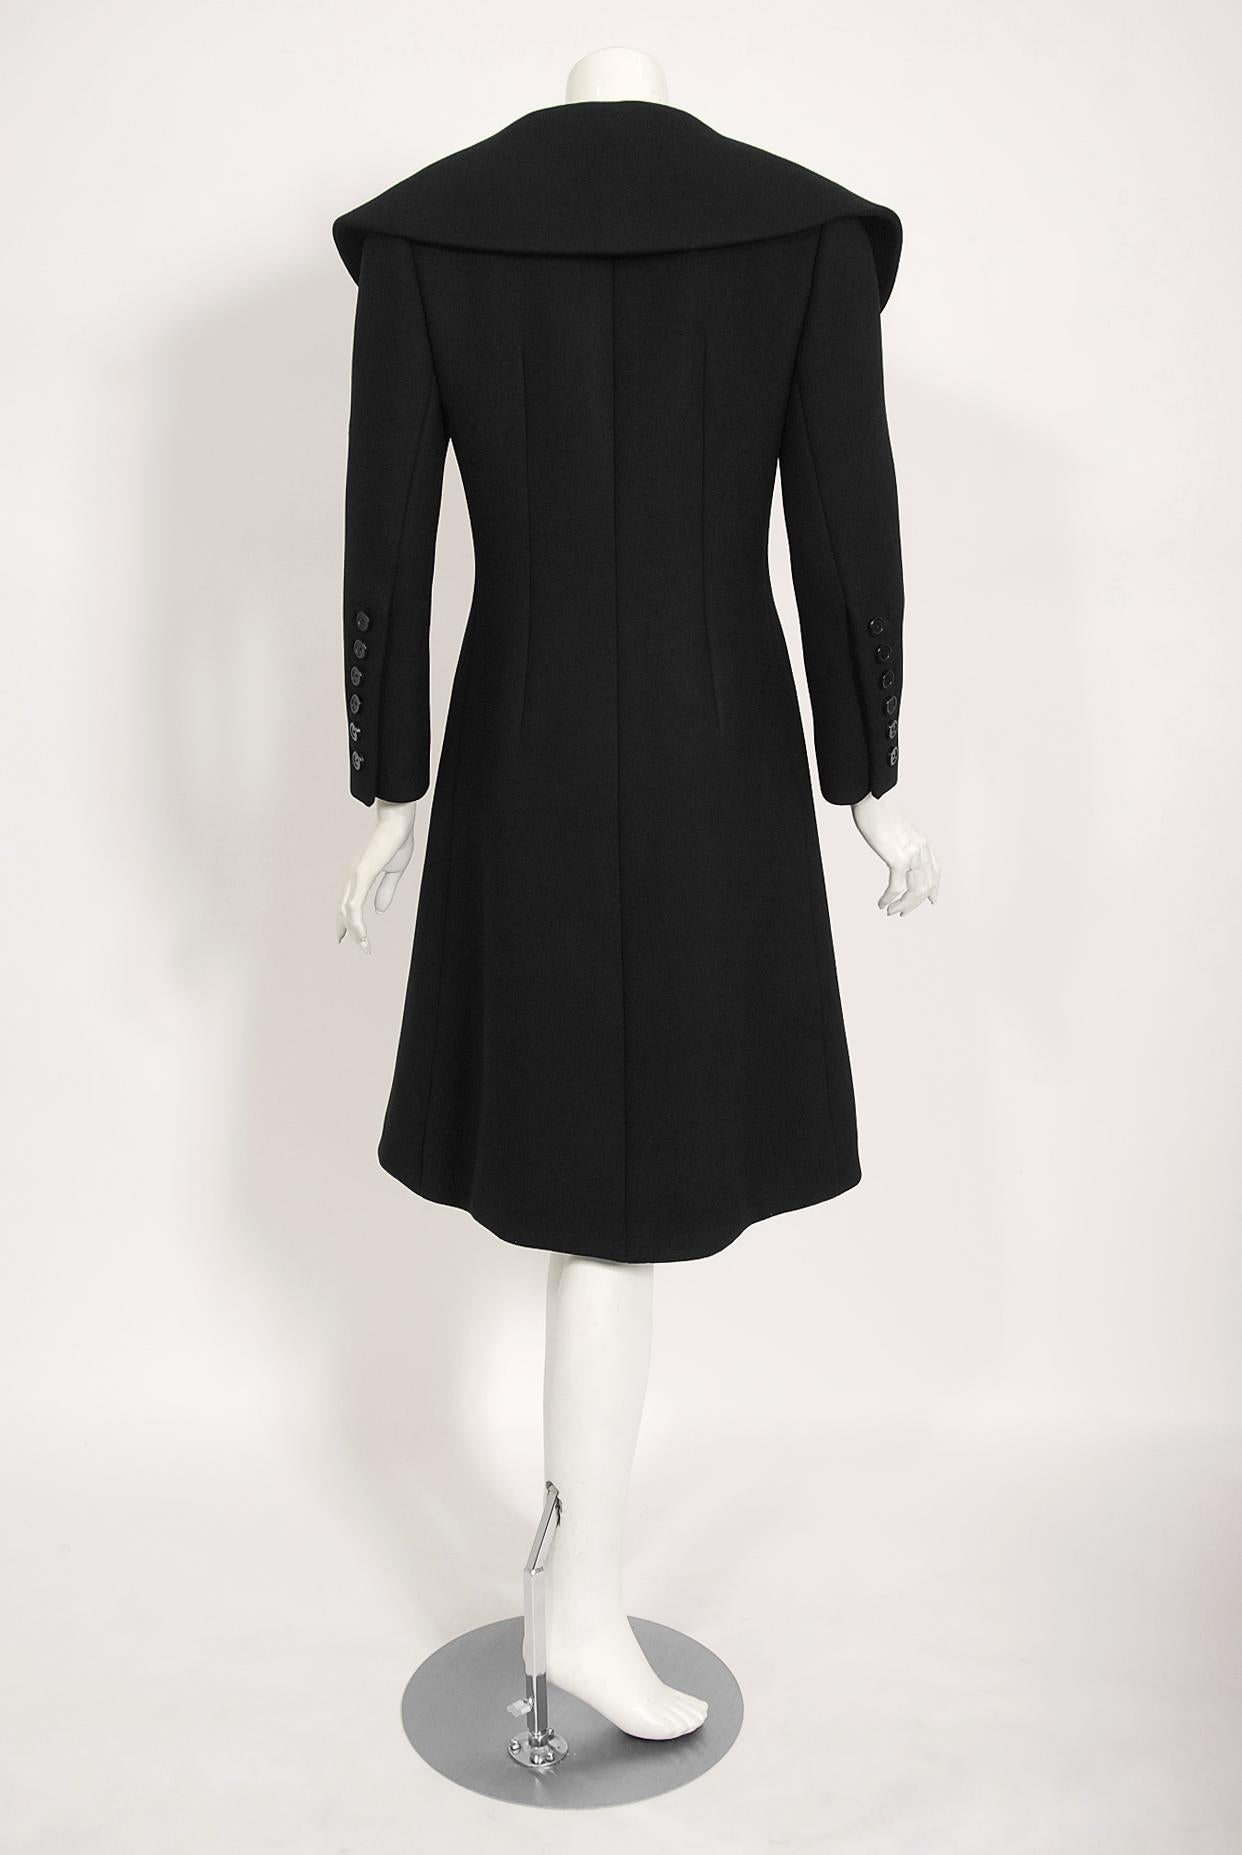 Vintage 1968 Norman Norell Black Wool Over-Sized Collar Double Breasted Mod Coat 5